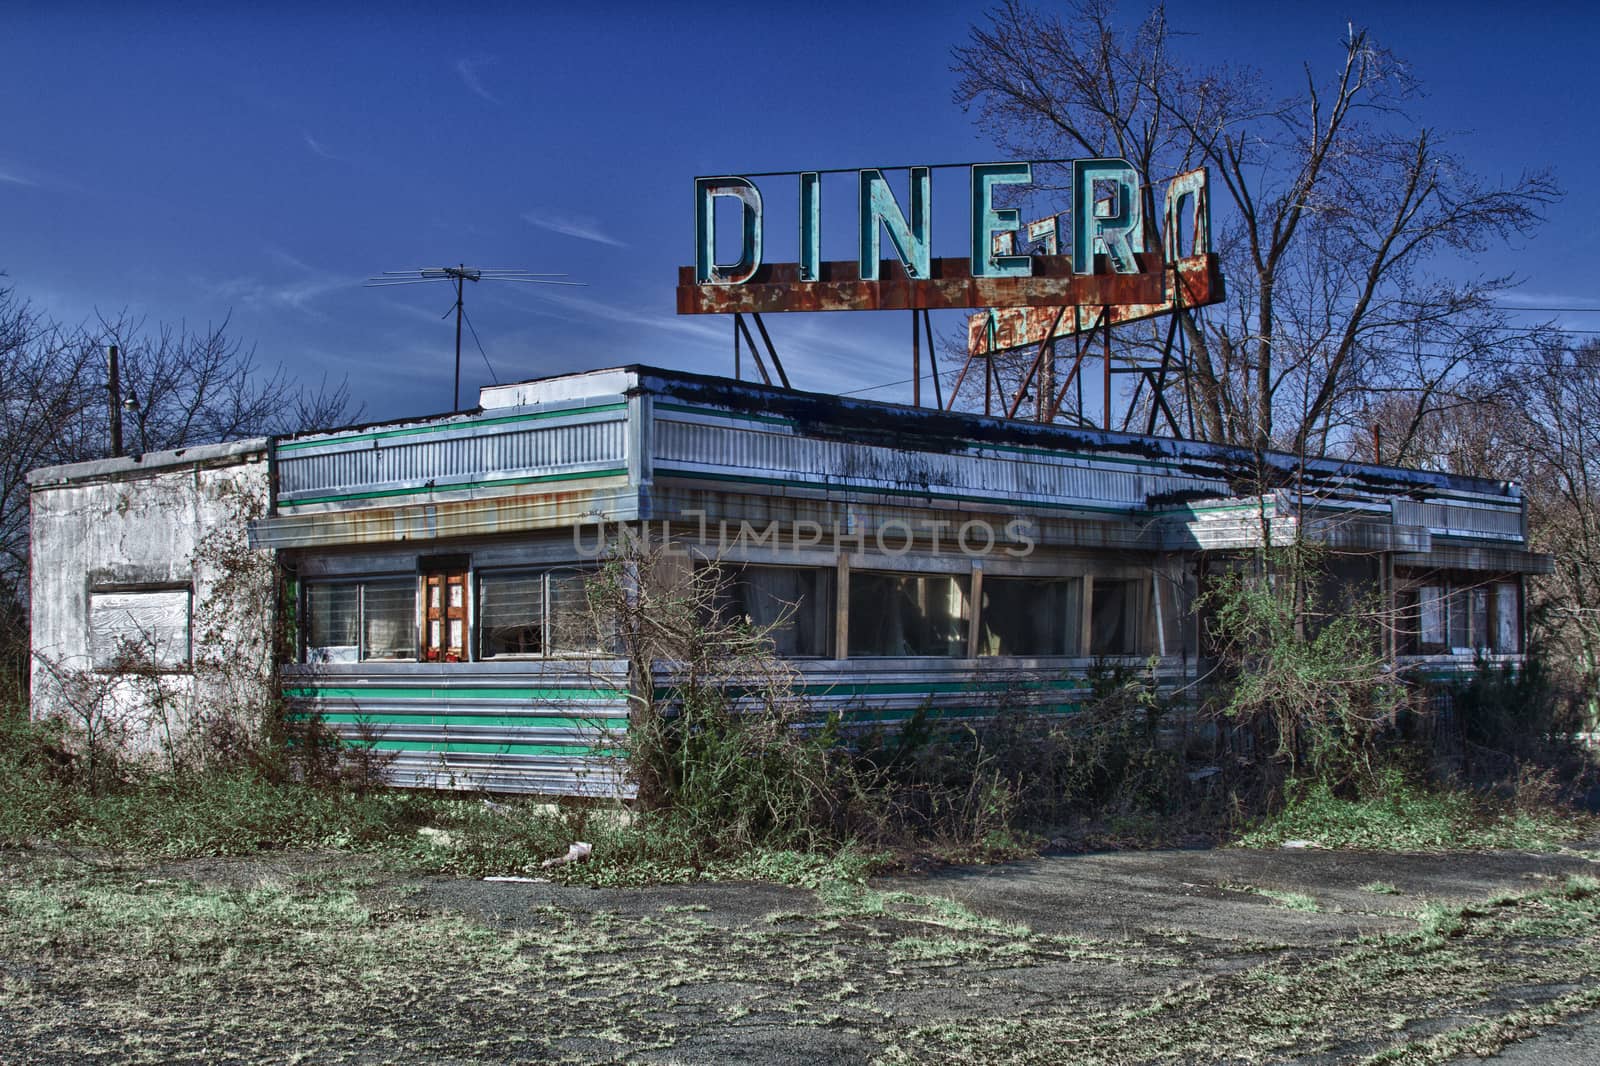 Abandoned diner by tedanddees